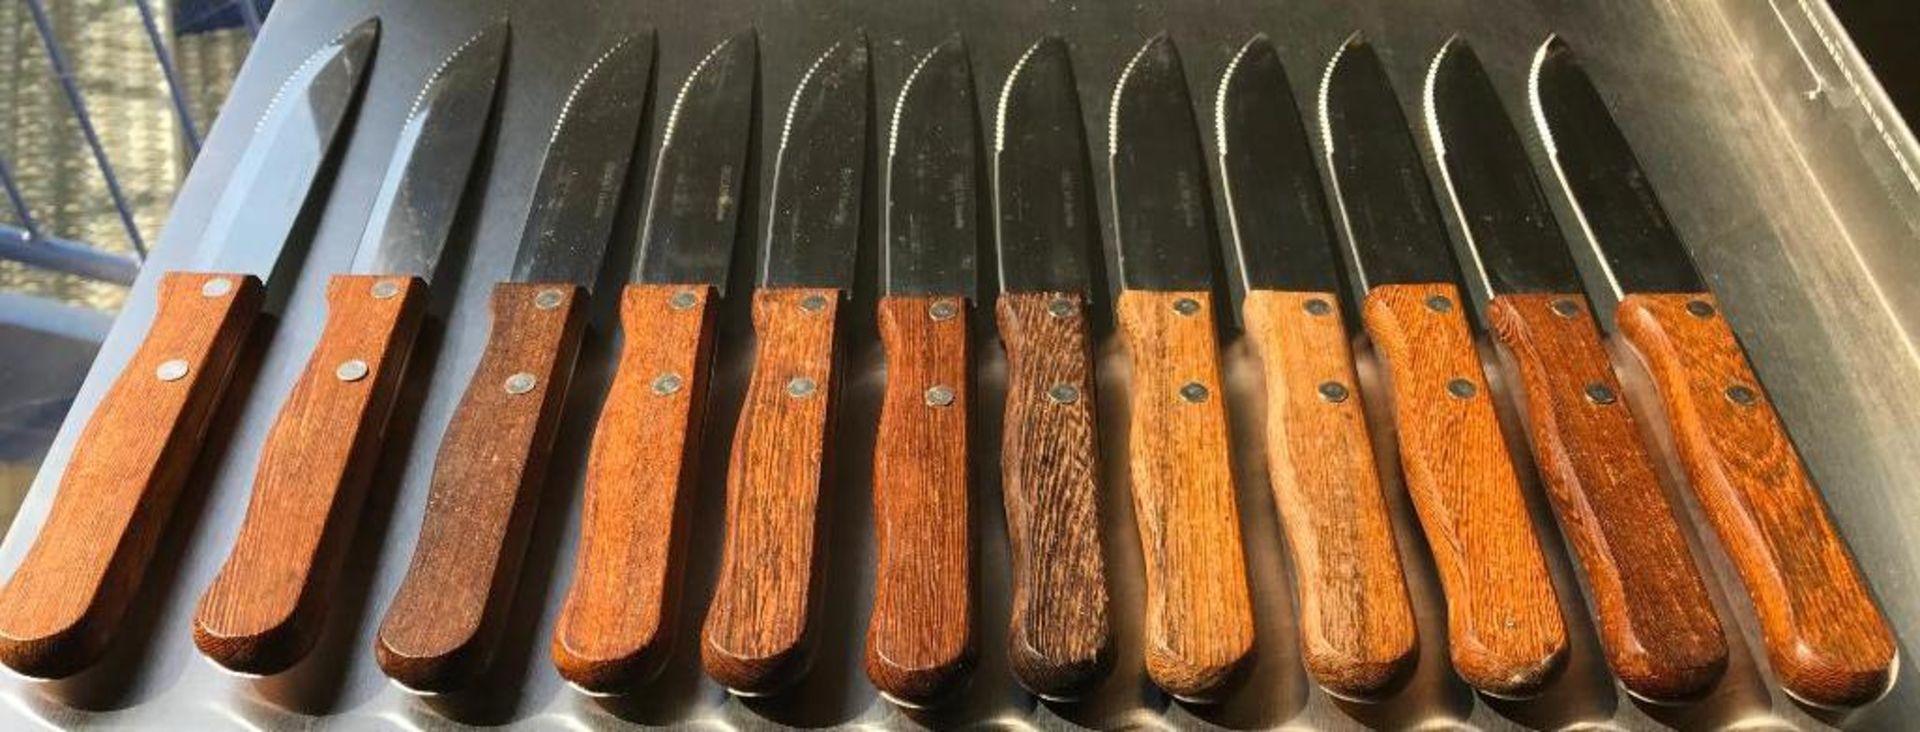 STEAK KNIVES, WOOD HANDLE, POINTED TIP - LOT OF 12 - Image 2 of 5